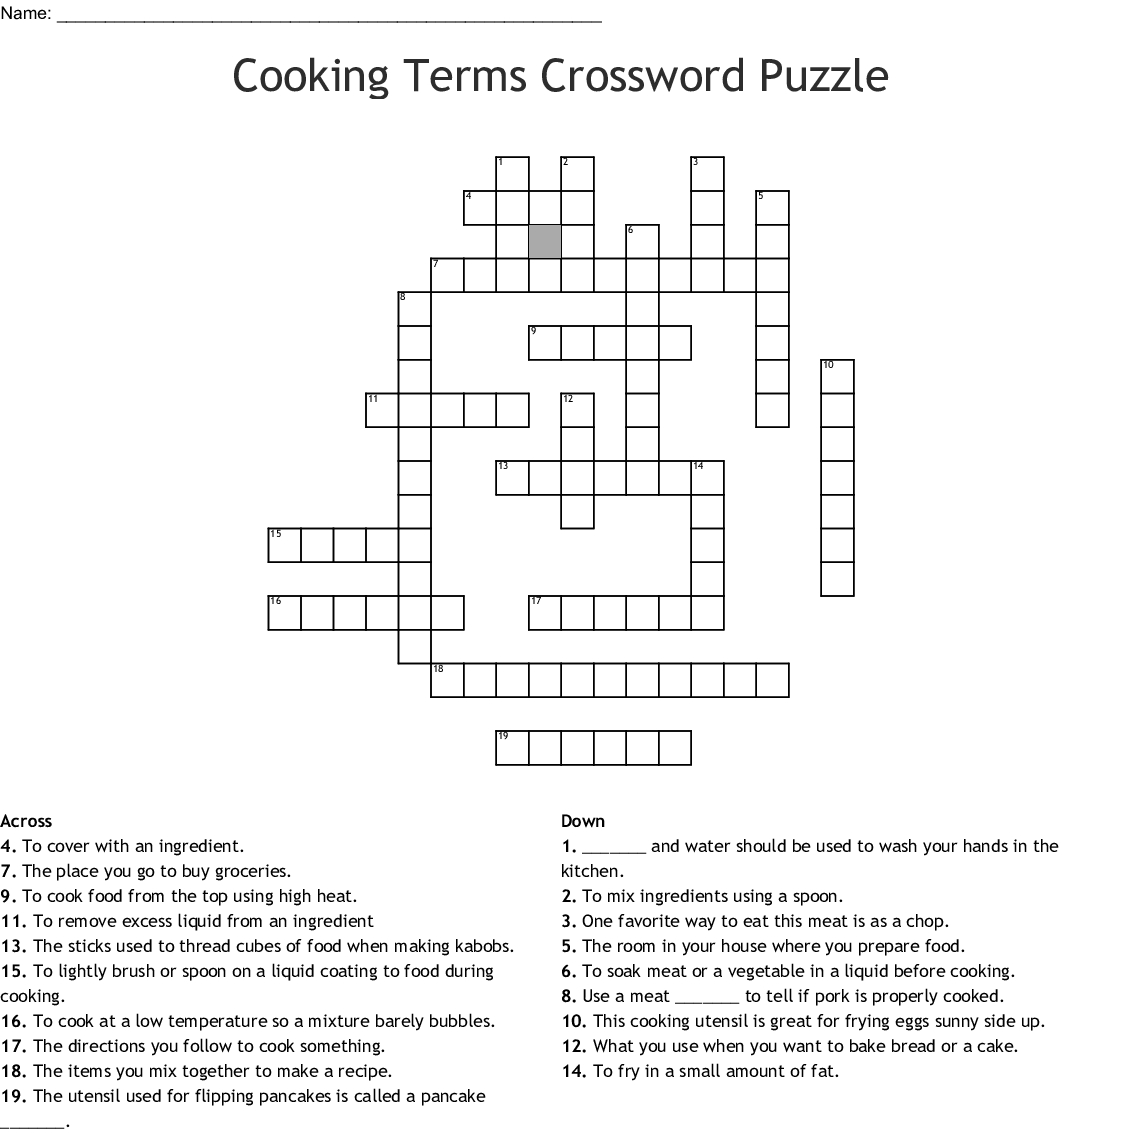 cooking terms crossword puzzle word db excelcom